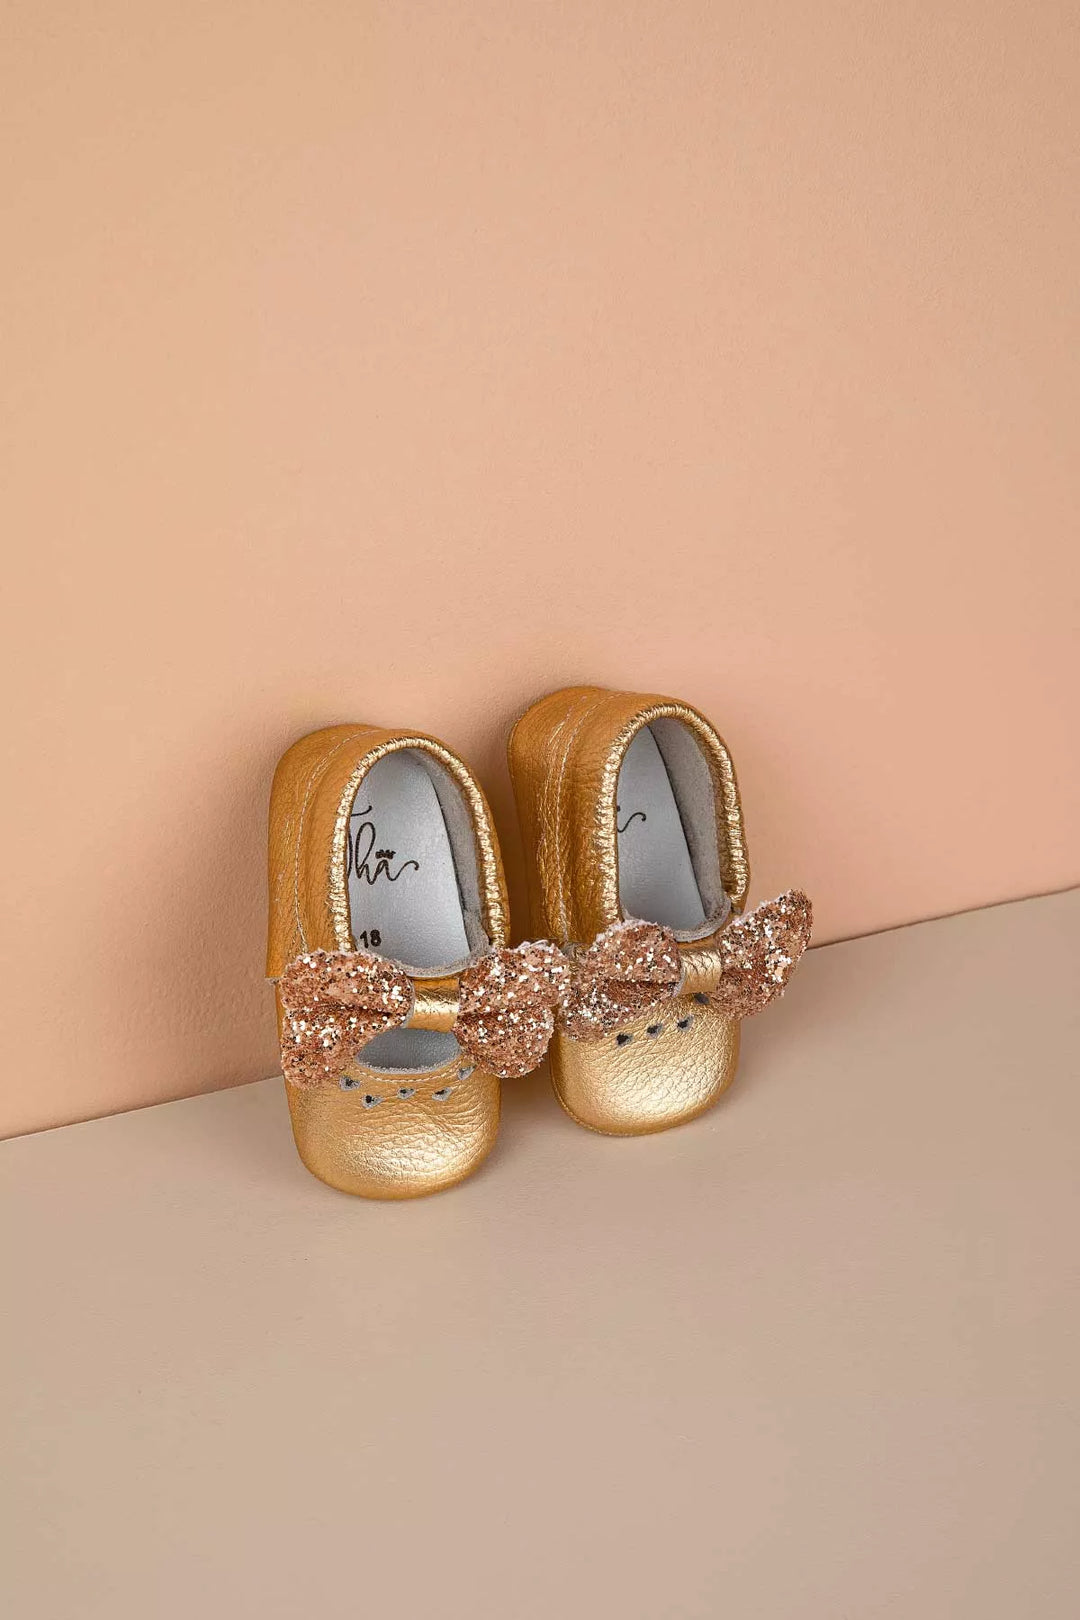 Gold baby shoes that have glitter bow tie and heart details